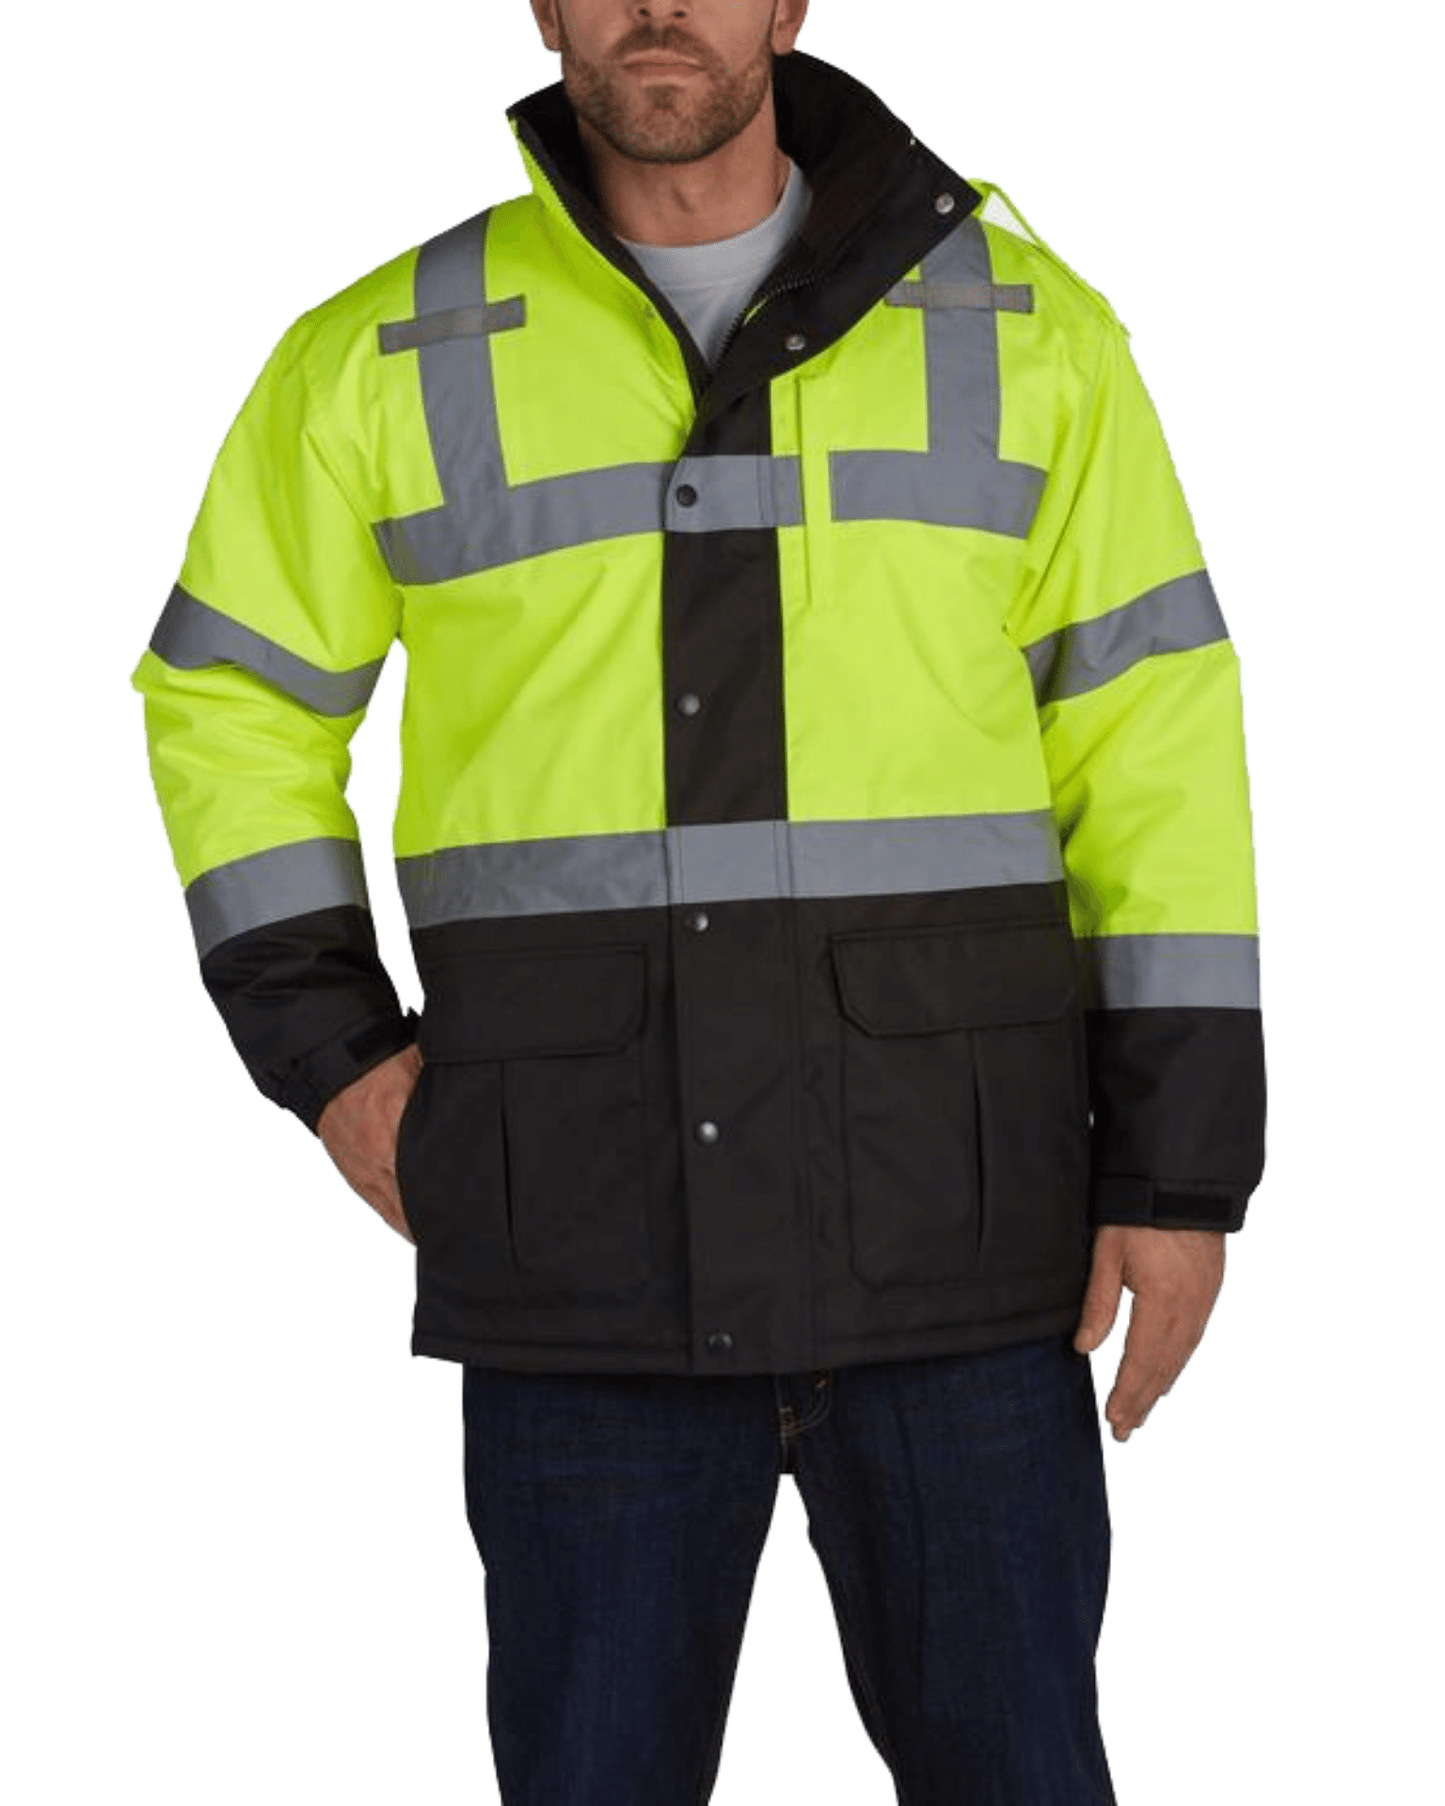 UHV1004 HiVis Contractor Jacket with Teflon Fabric Protector - Yellow/Grey